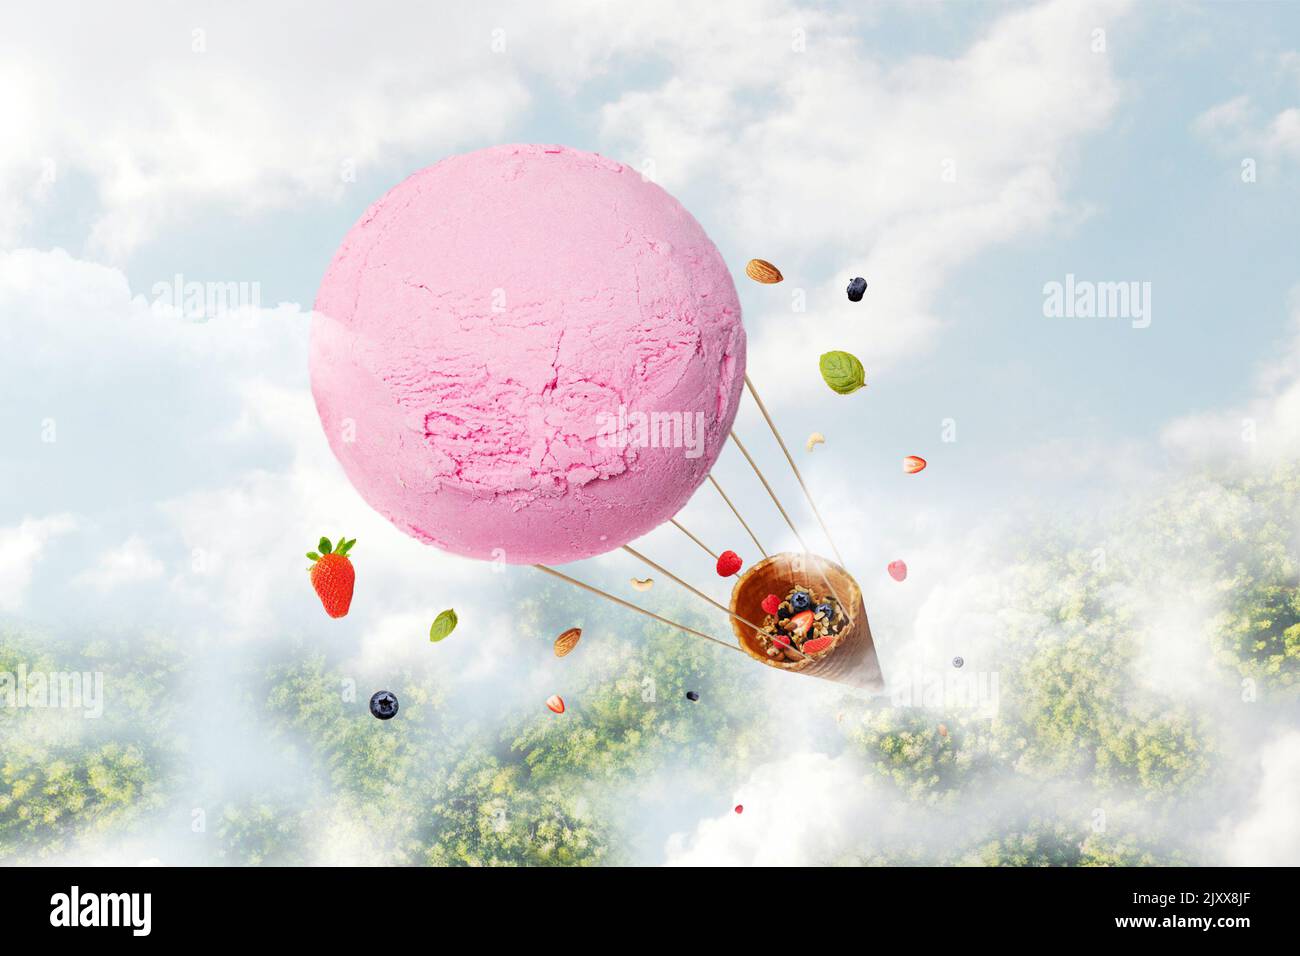 Eating a fruity dessert on a hot day is a heavenly feeling with a scoop of strawberry ice cream carrying a waffle cone on a wonderful adventure surrou Stock Photo